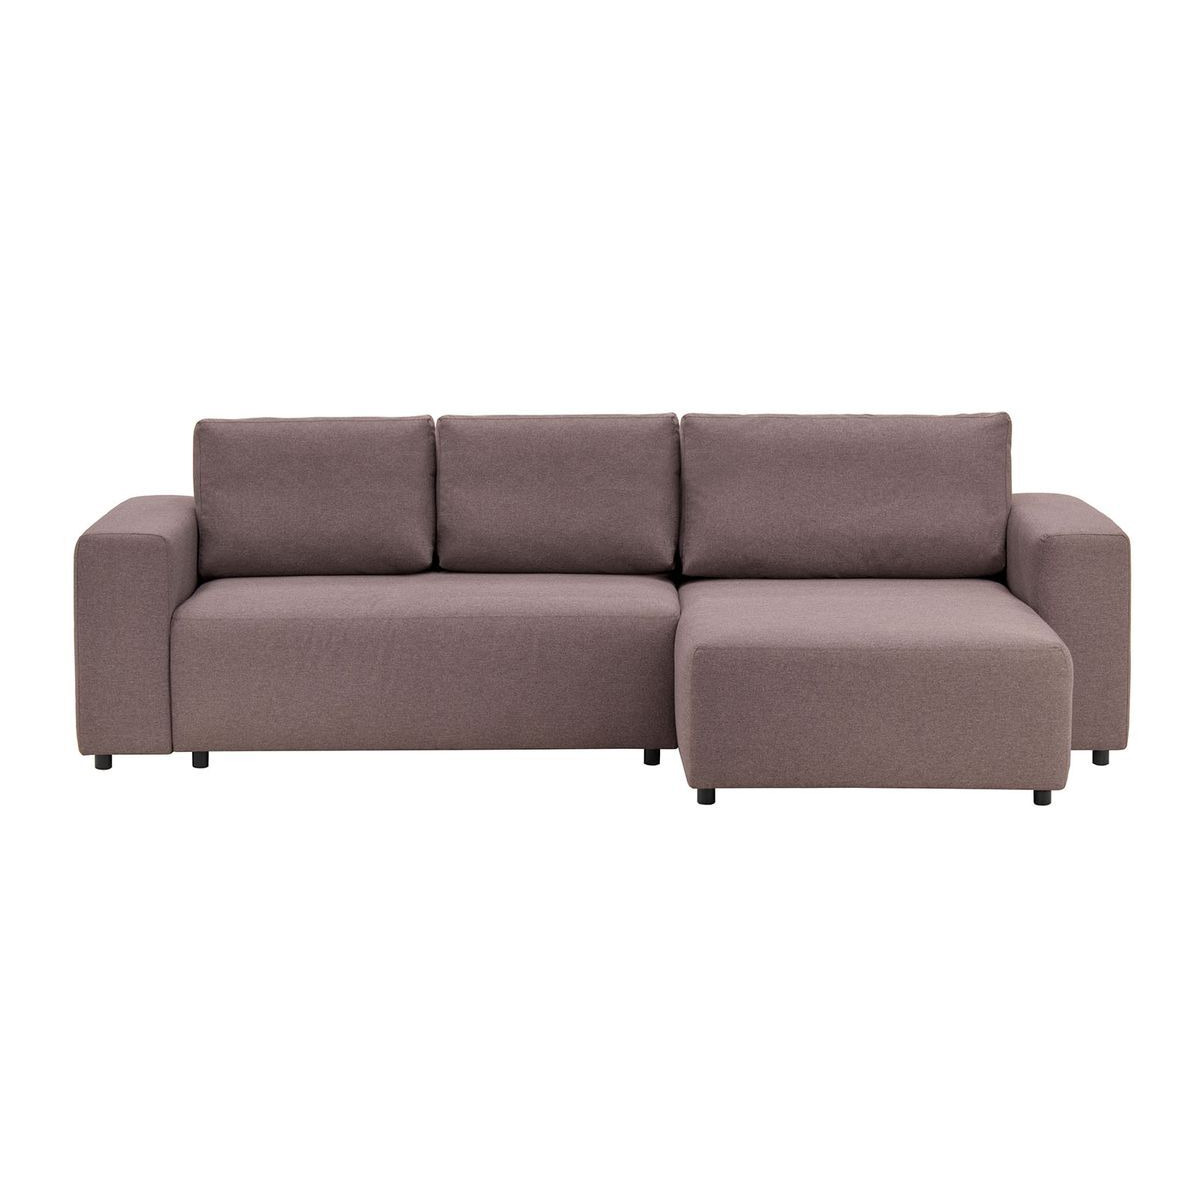 Solace Right Hand Corner Sofa Bed, light brown - image 1